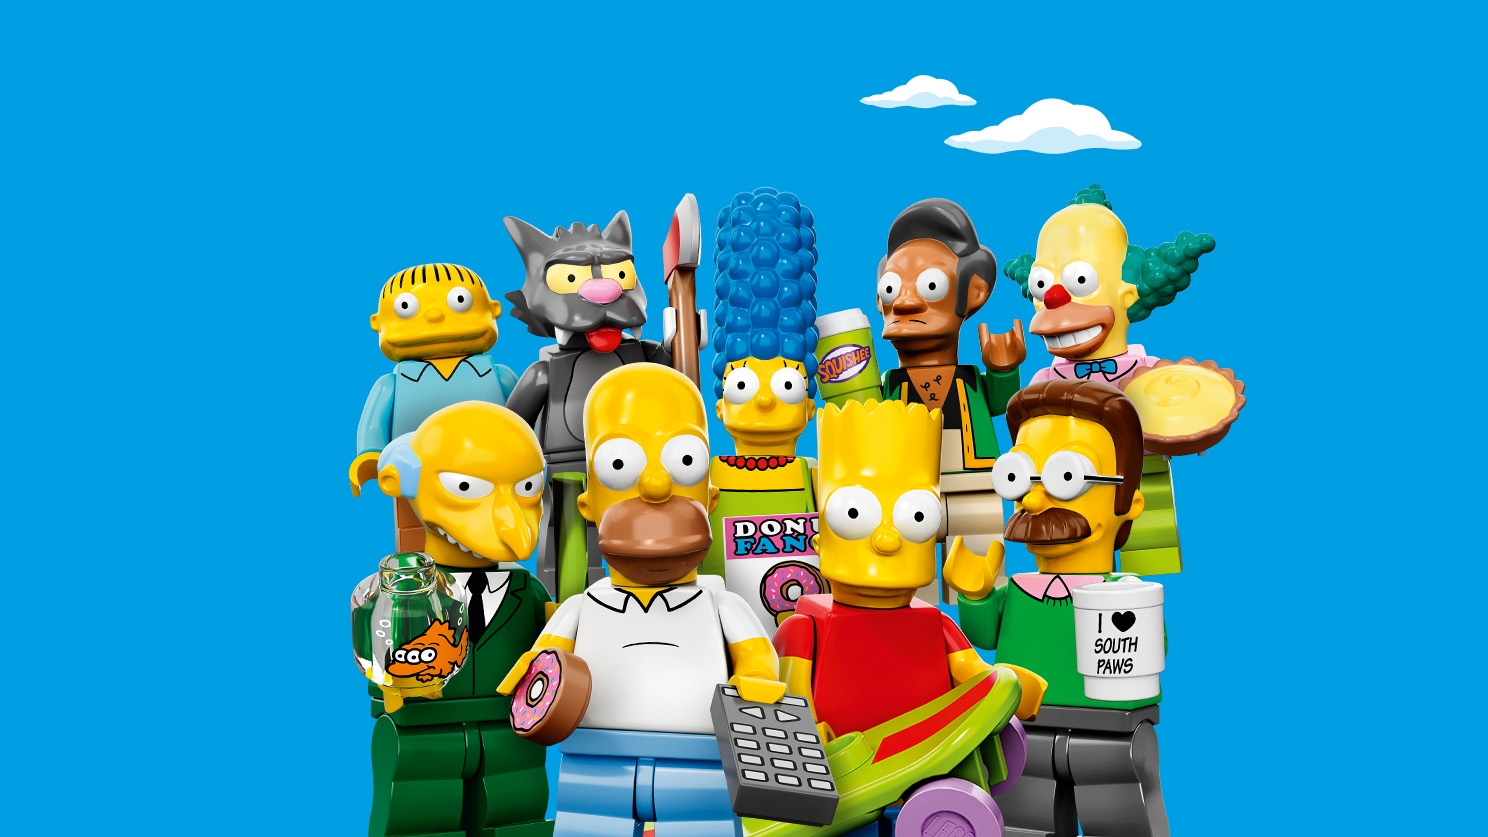 Minifigures, The Simpsons™ Series - LEGO® Minifigures Sets - for kids